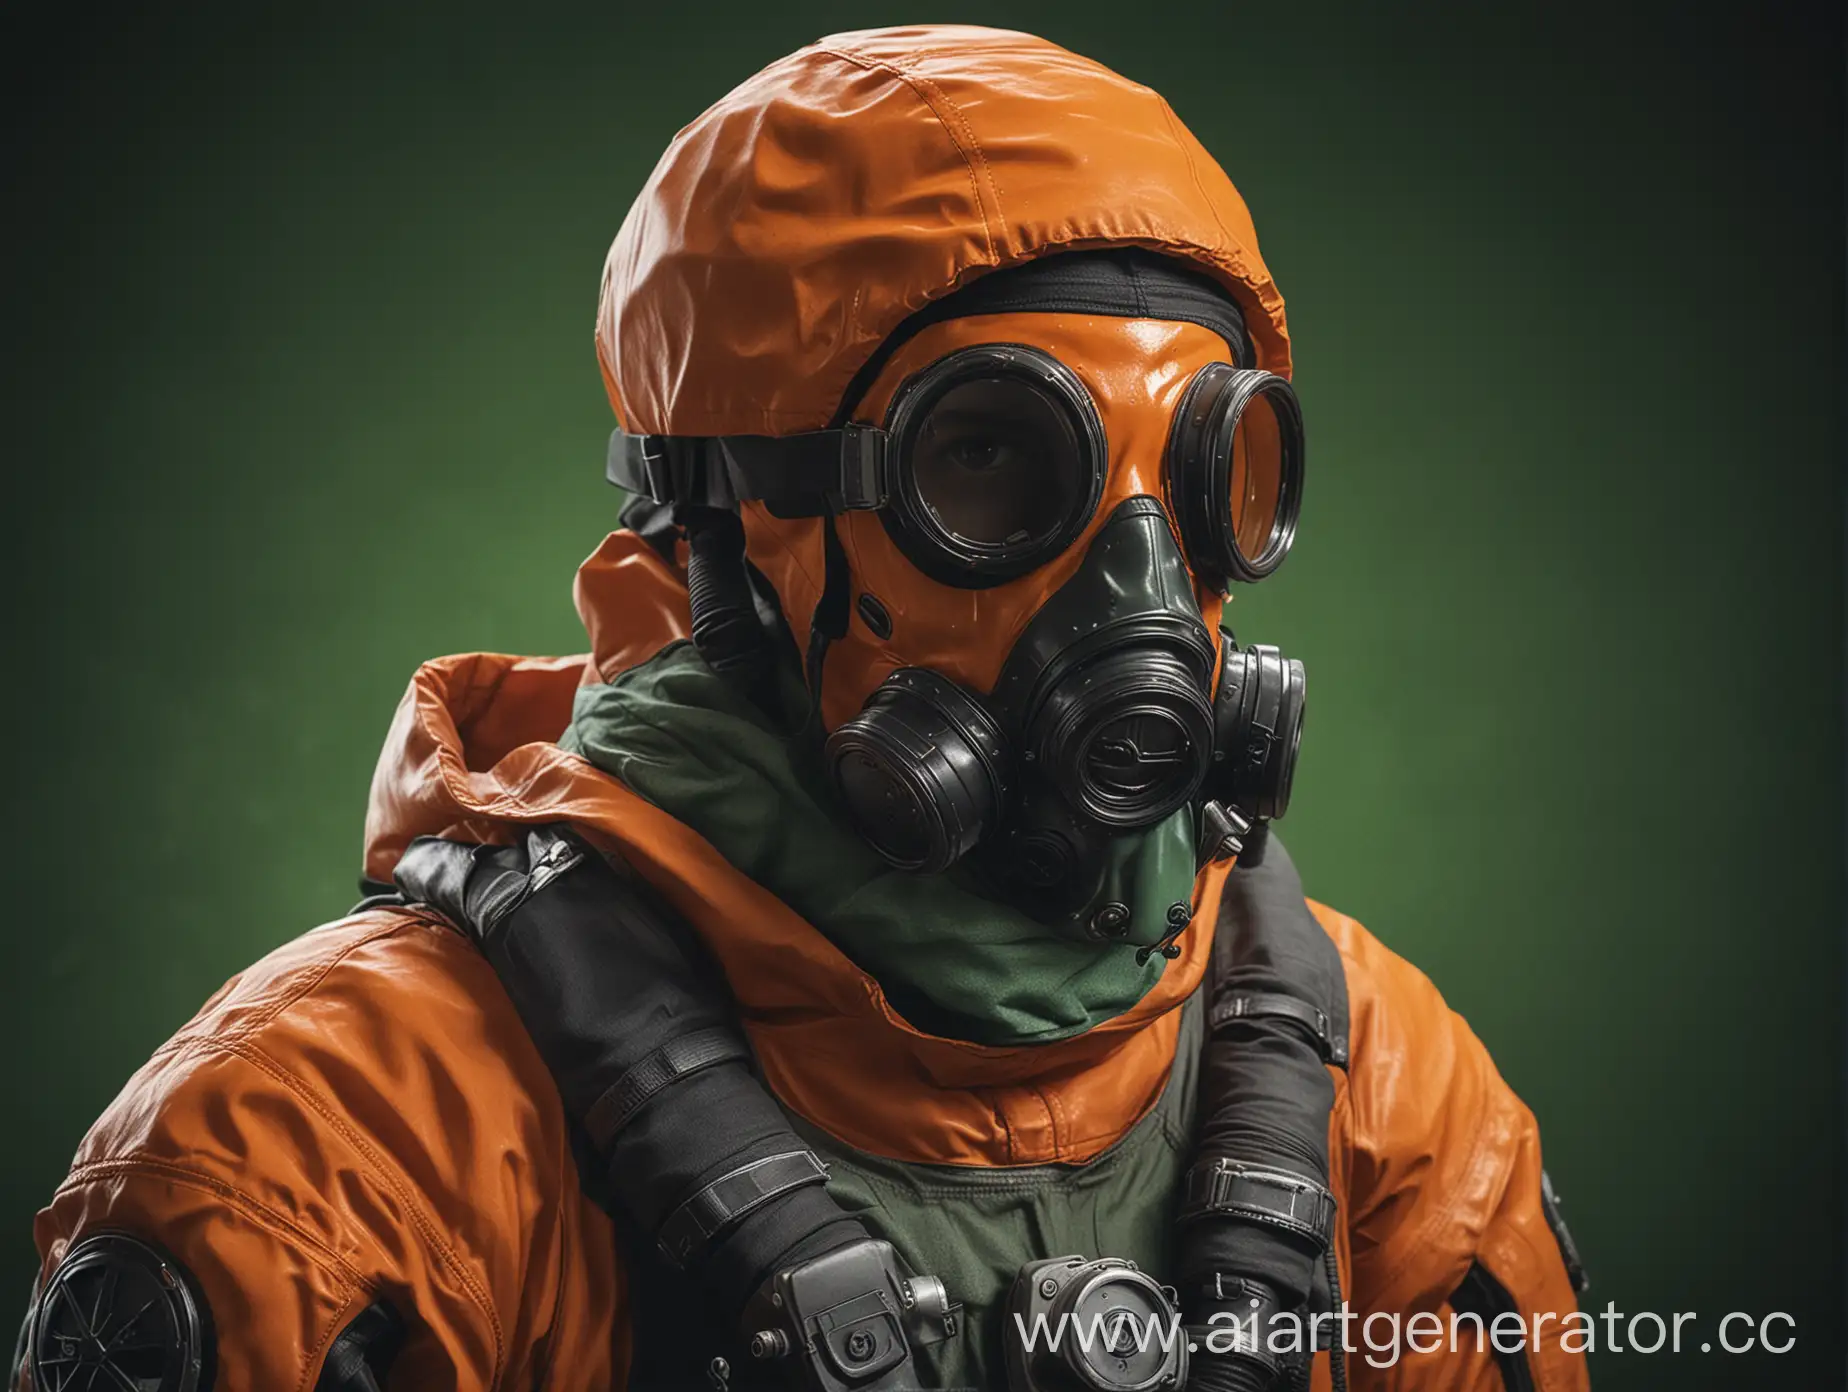 Lethal-Company-Character-in-Orange-Spacesuit-with-Black-Gas-Mask-on-Green-Background